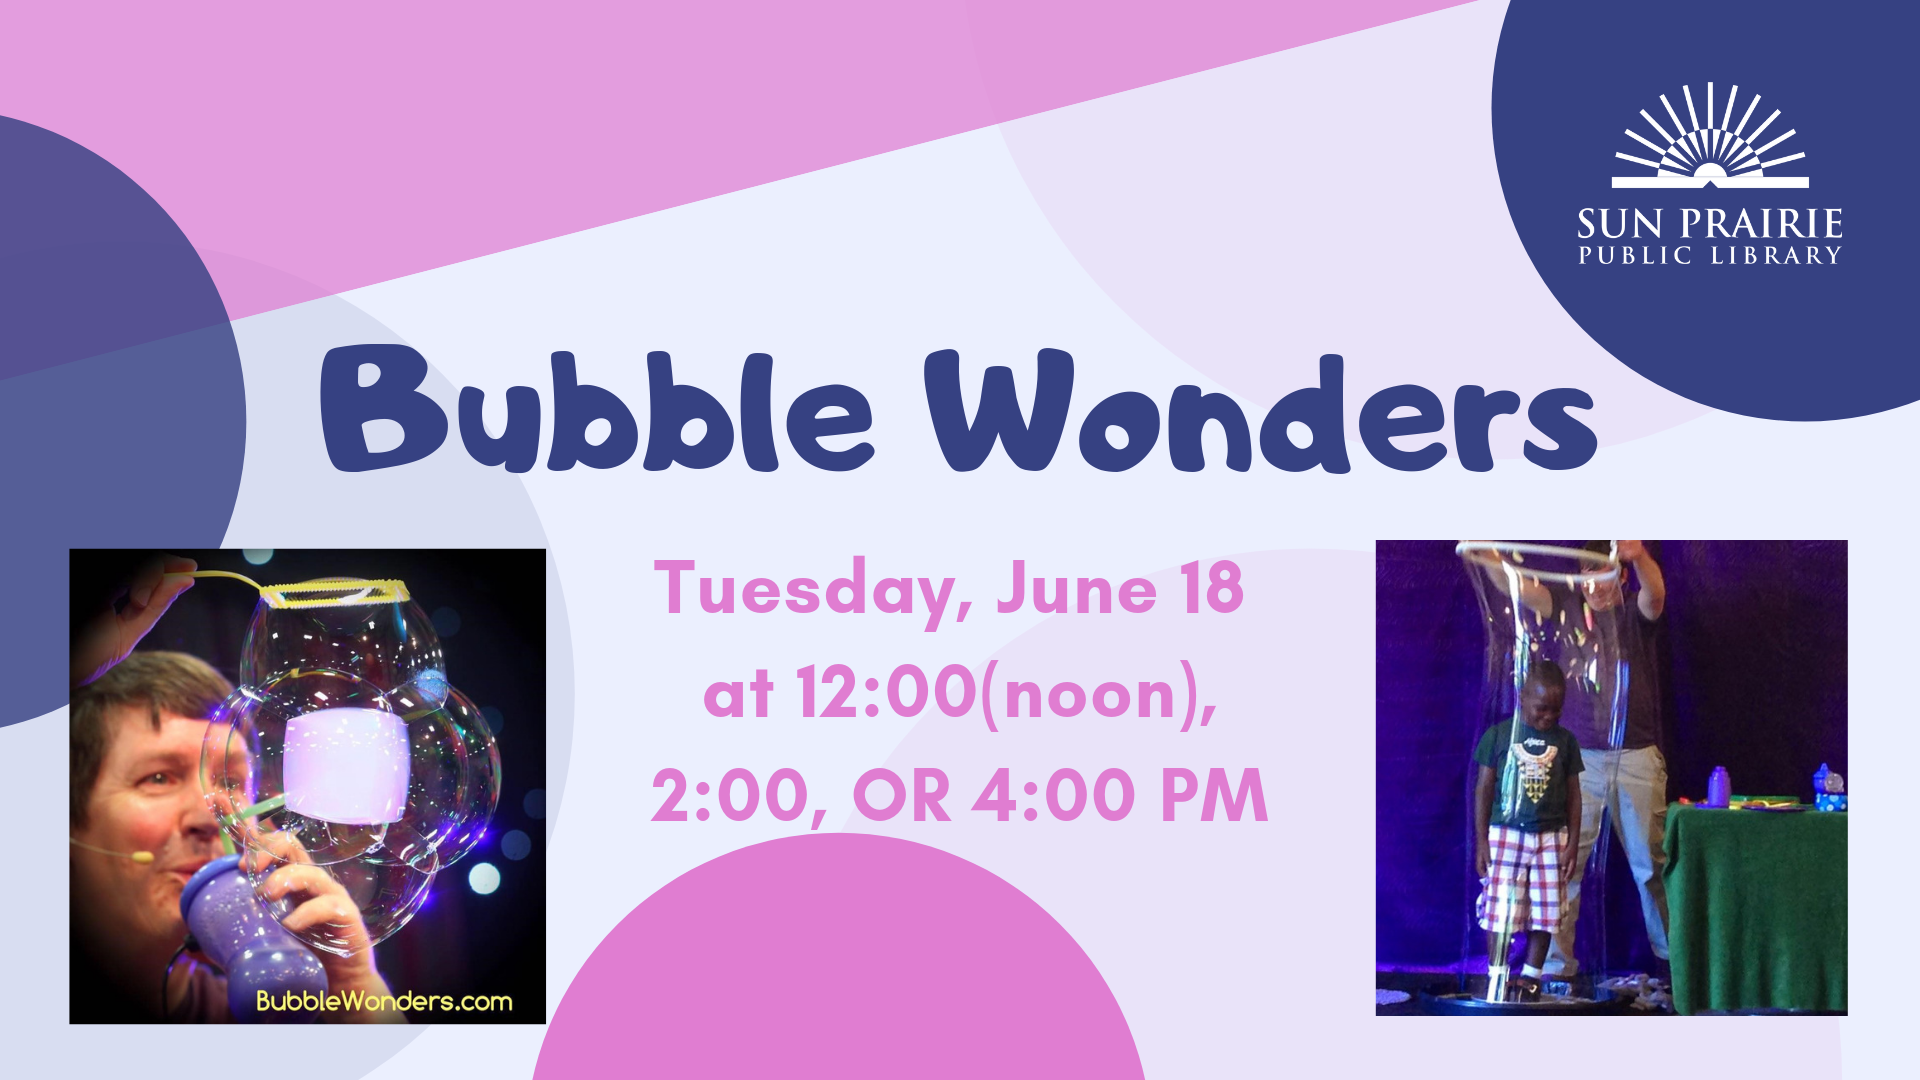 Bubble Wonders photos with date and time